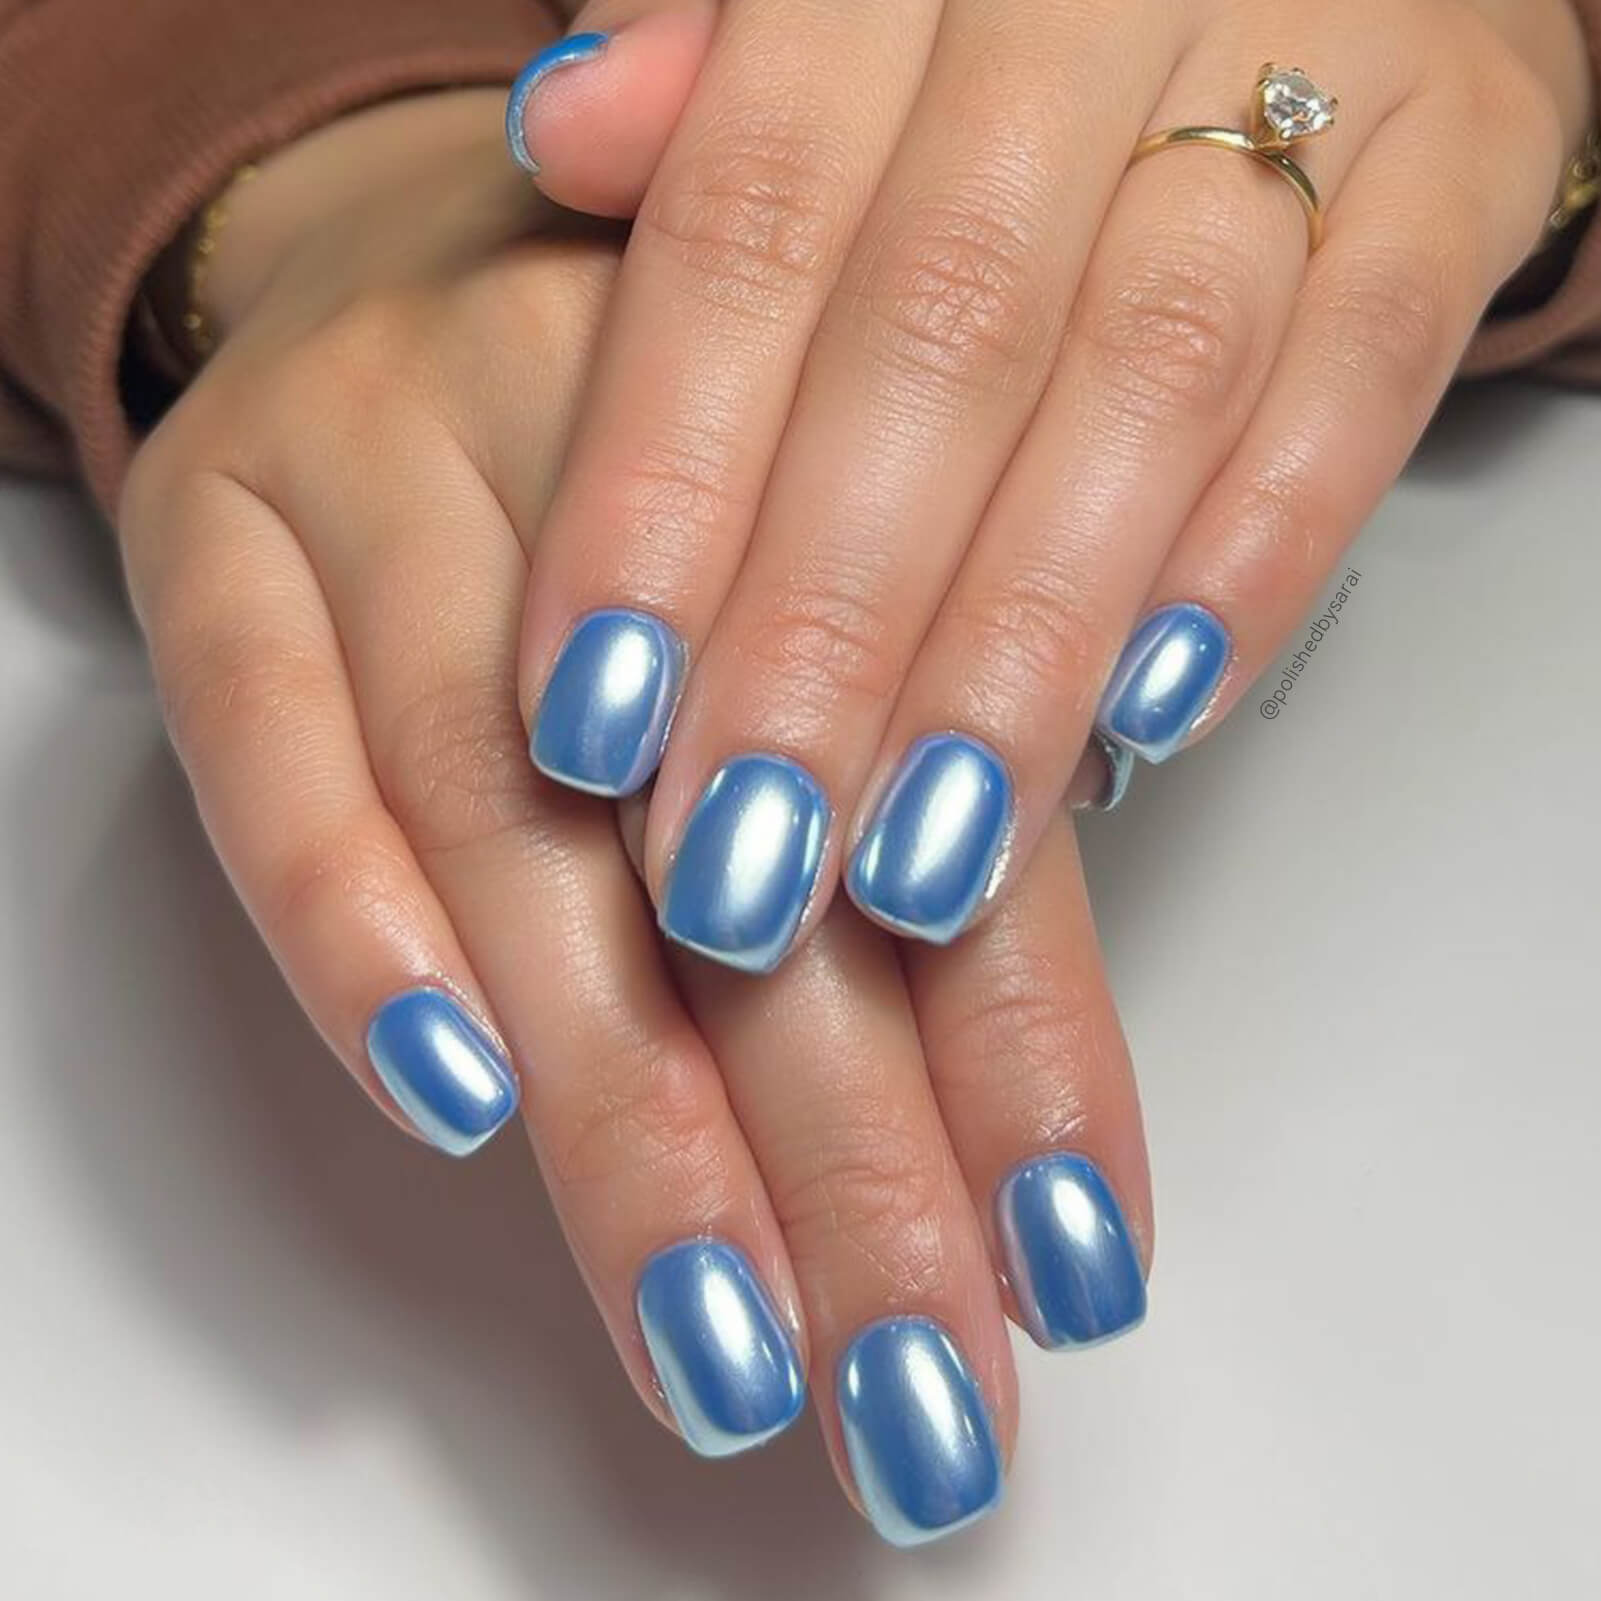 Ombre Nails: Turquoise Blue and Gold Chrome Gradient - Beauty Art by Olga